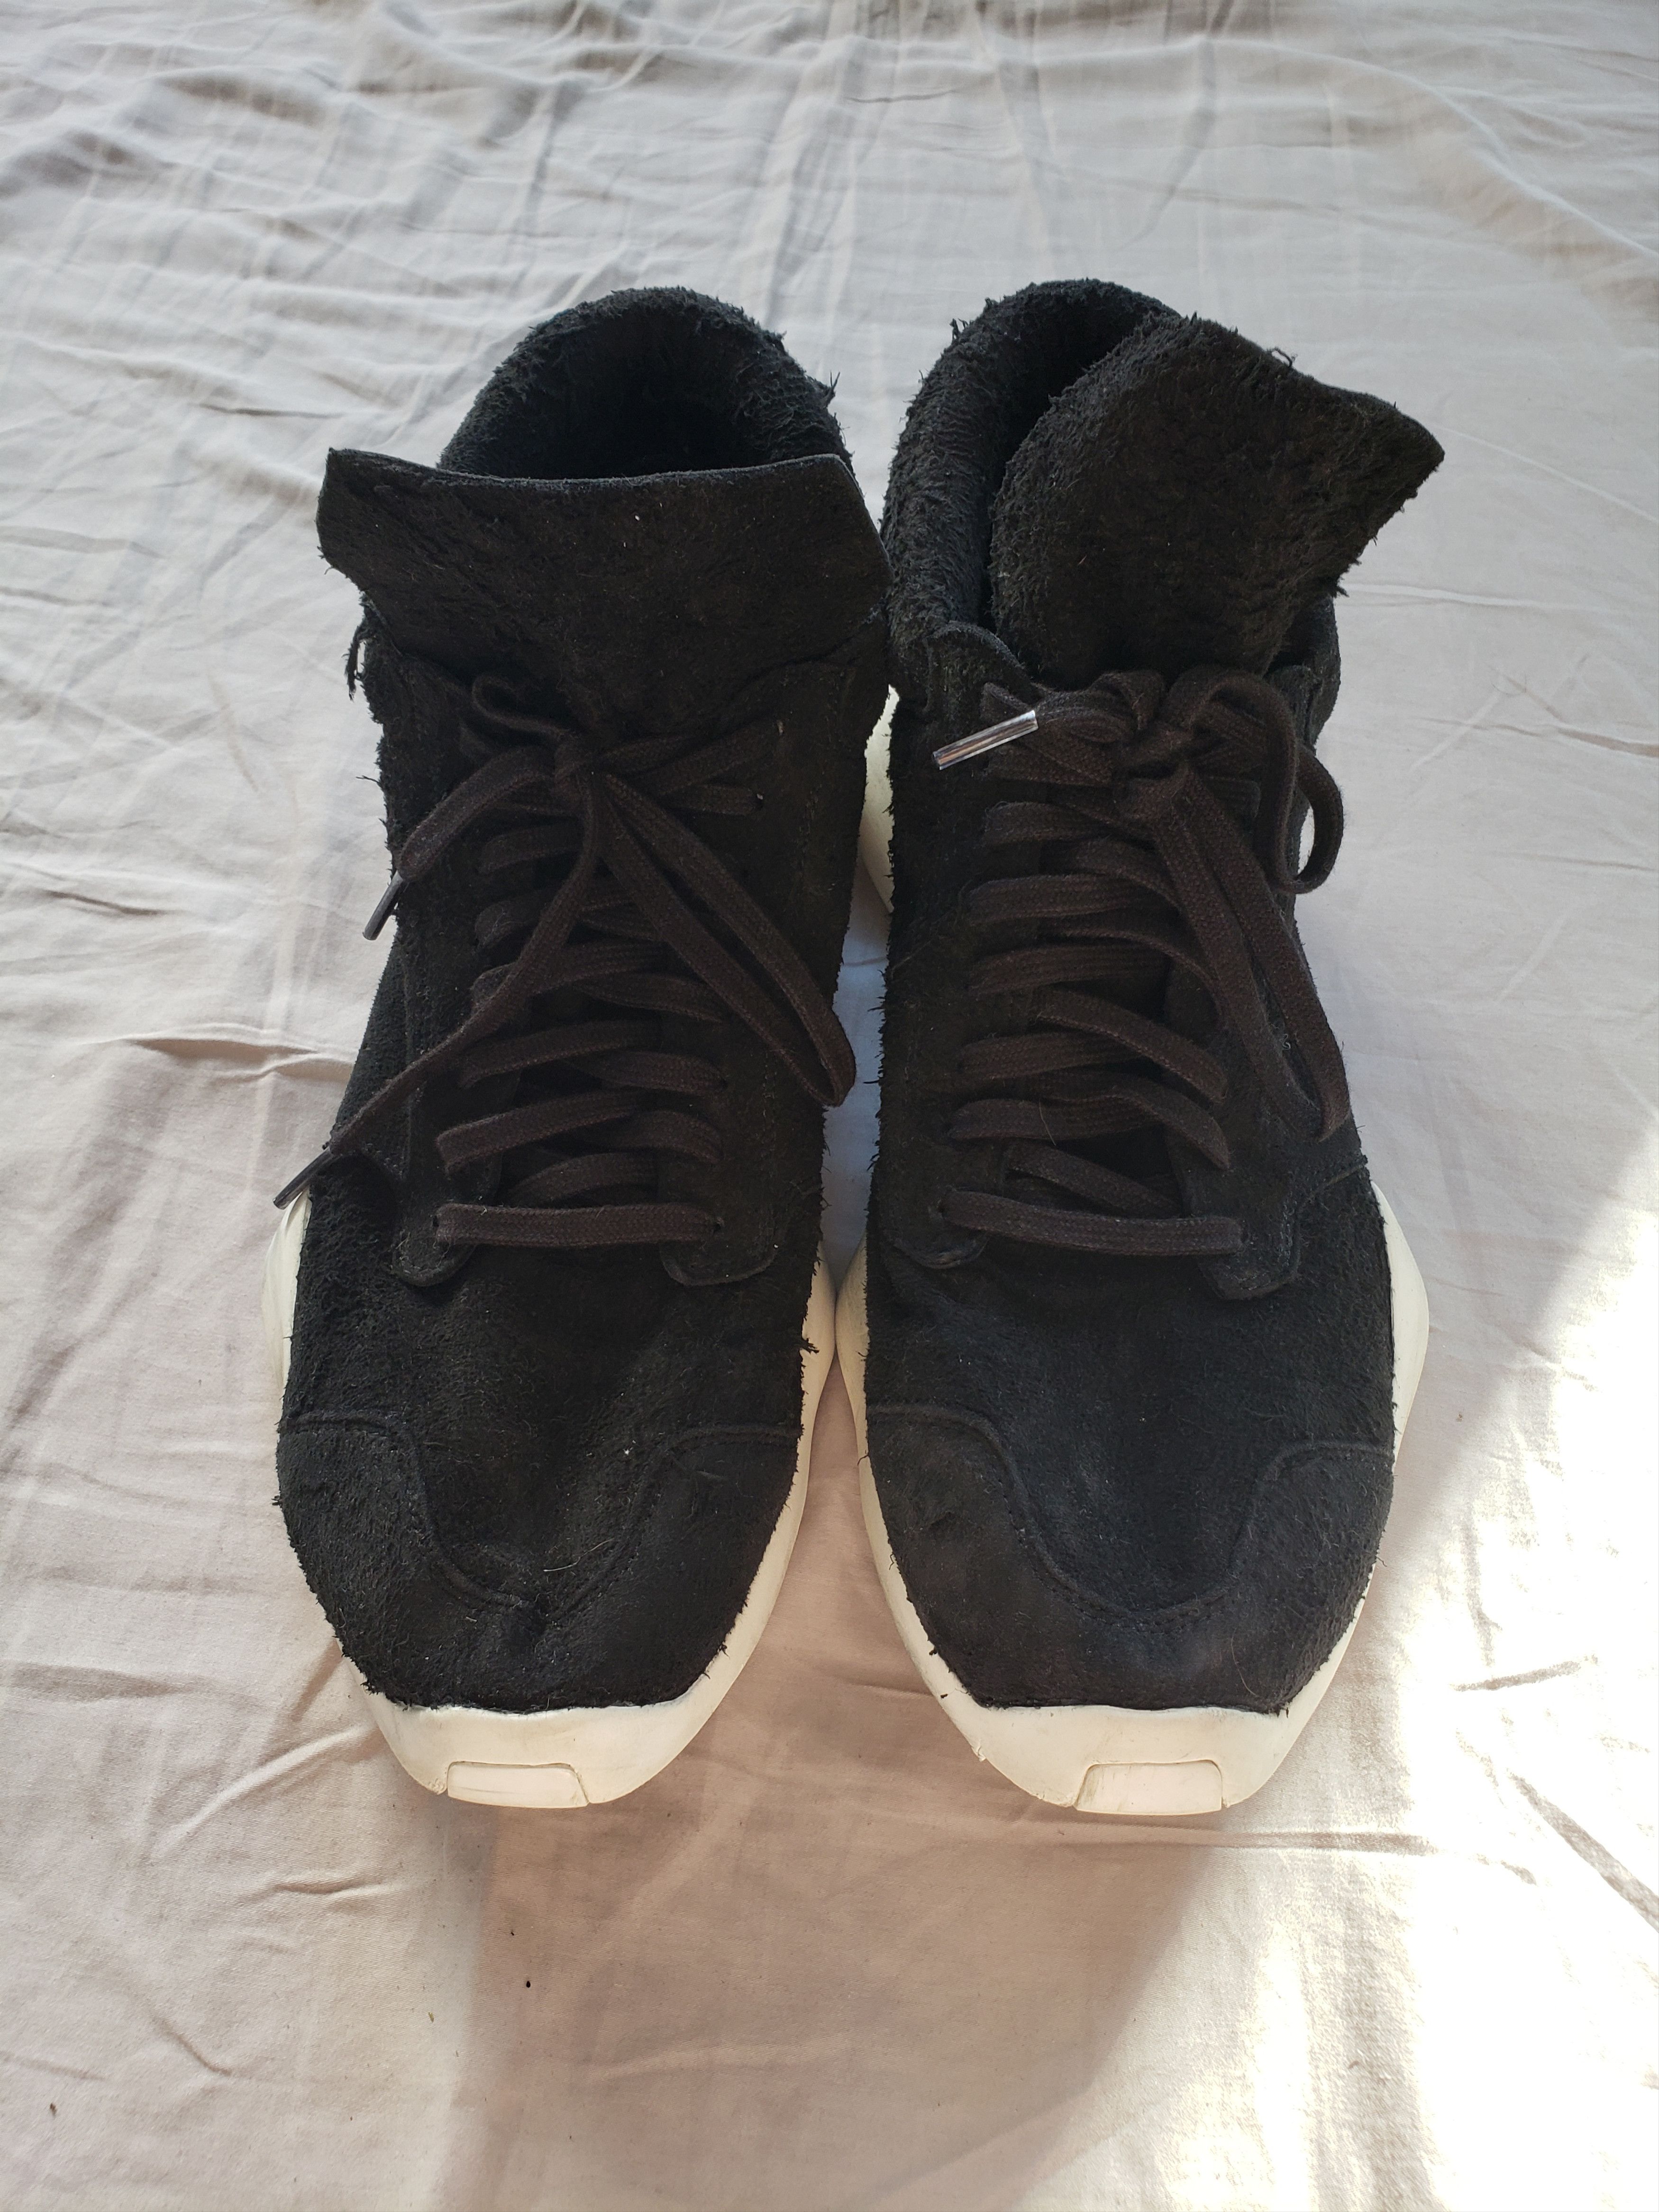 Rick Owens Distressed Suede Runners Size US 12.5 / EU 45-46 - 3 Thumbnail